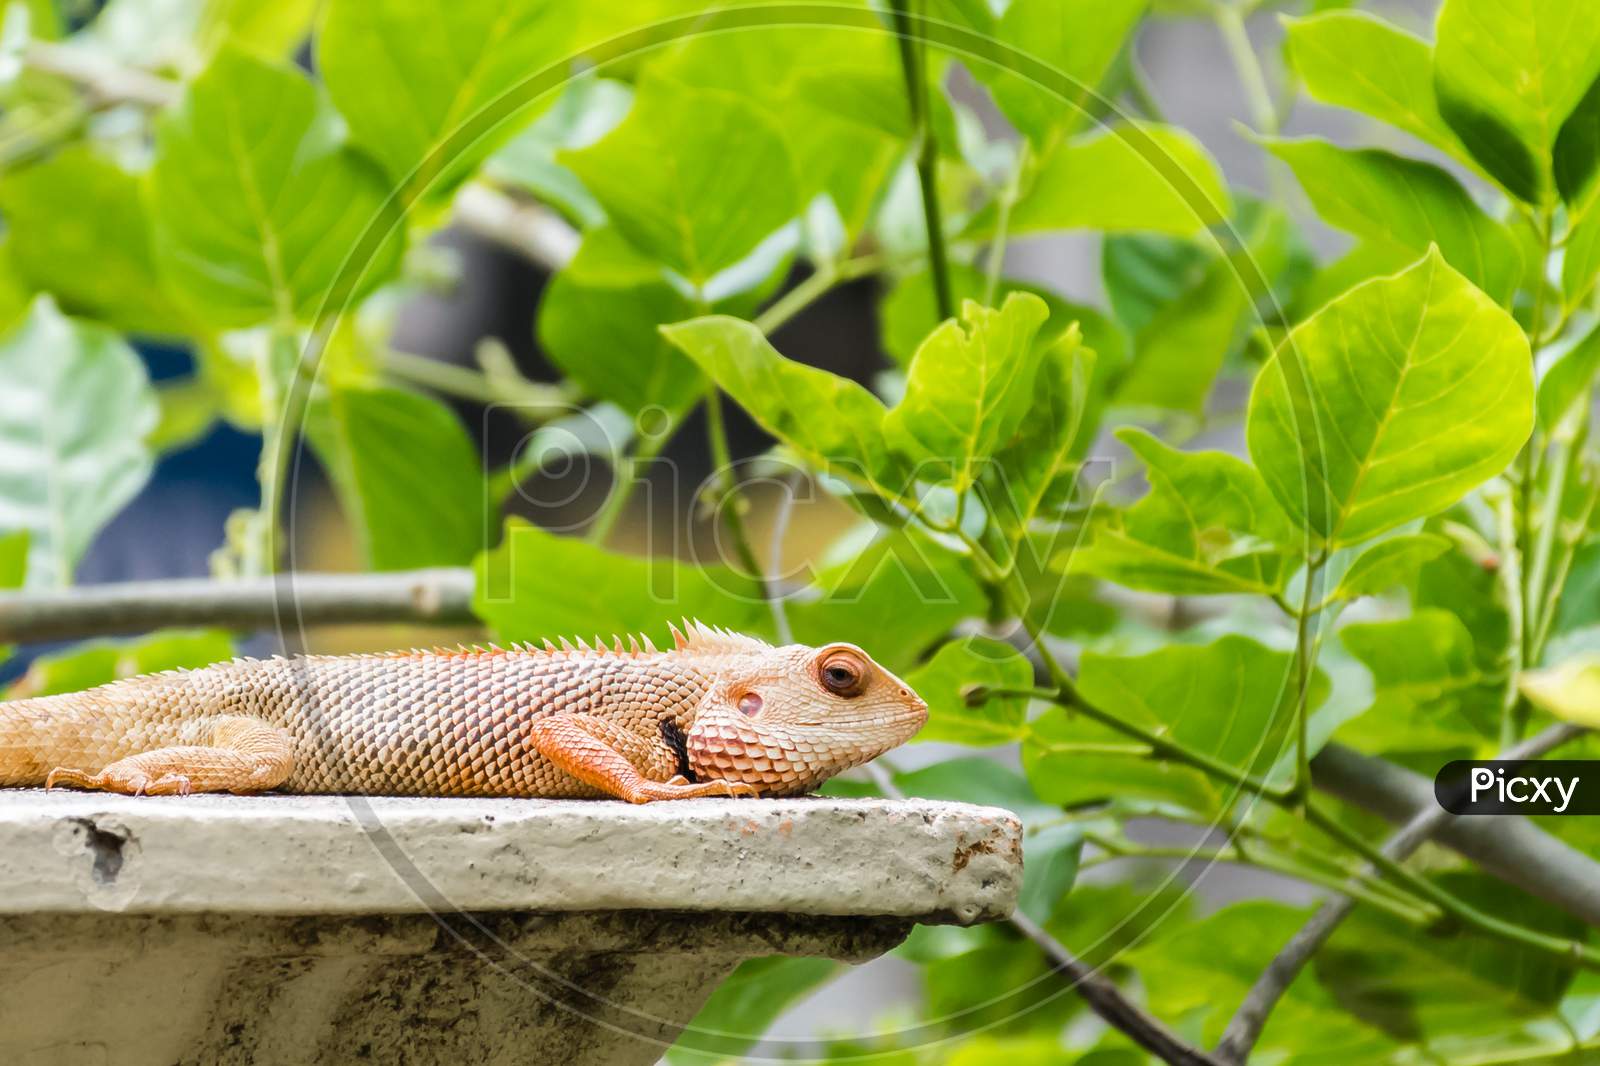 Oriental Garden Lizard (Calotes Versicolor) Captured On A Wall Surrounded By Bright Green Leaves